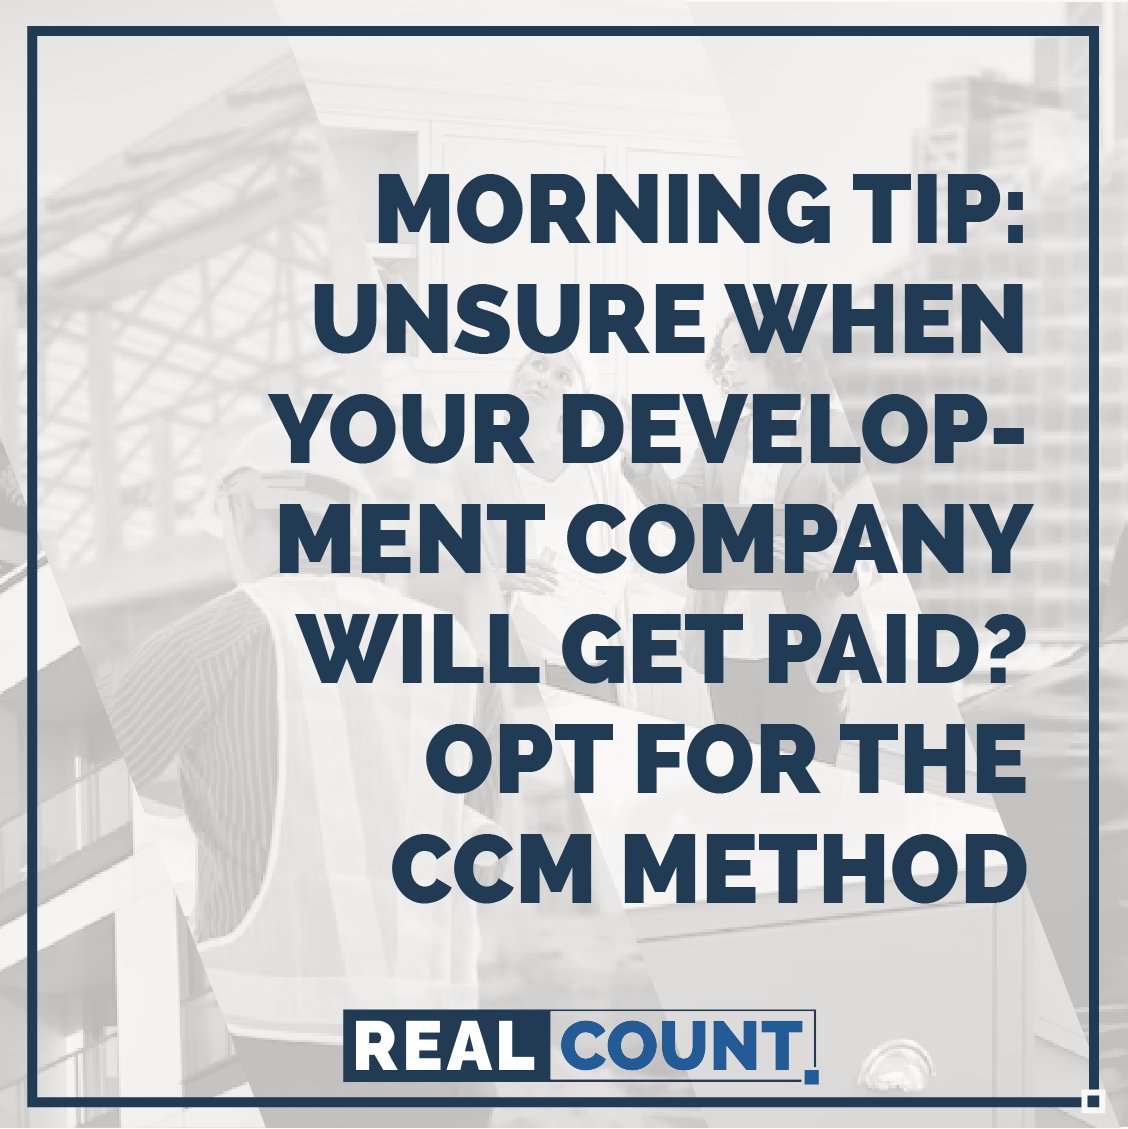 DAILY TIP: Combat uncertain timelines and payments using the completed contract accounting method. But be sure to consult your real estate CPA first.

#commercialrealestate #realestateinvesting #realestate #realestatedevelopment #realestateconstruction #construction